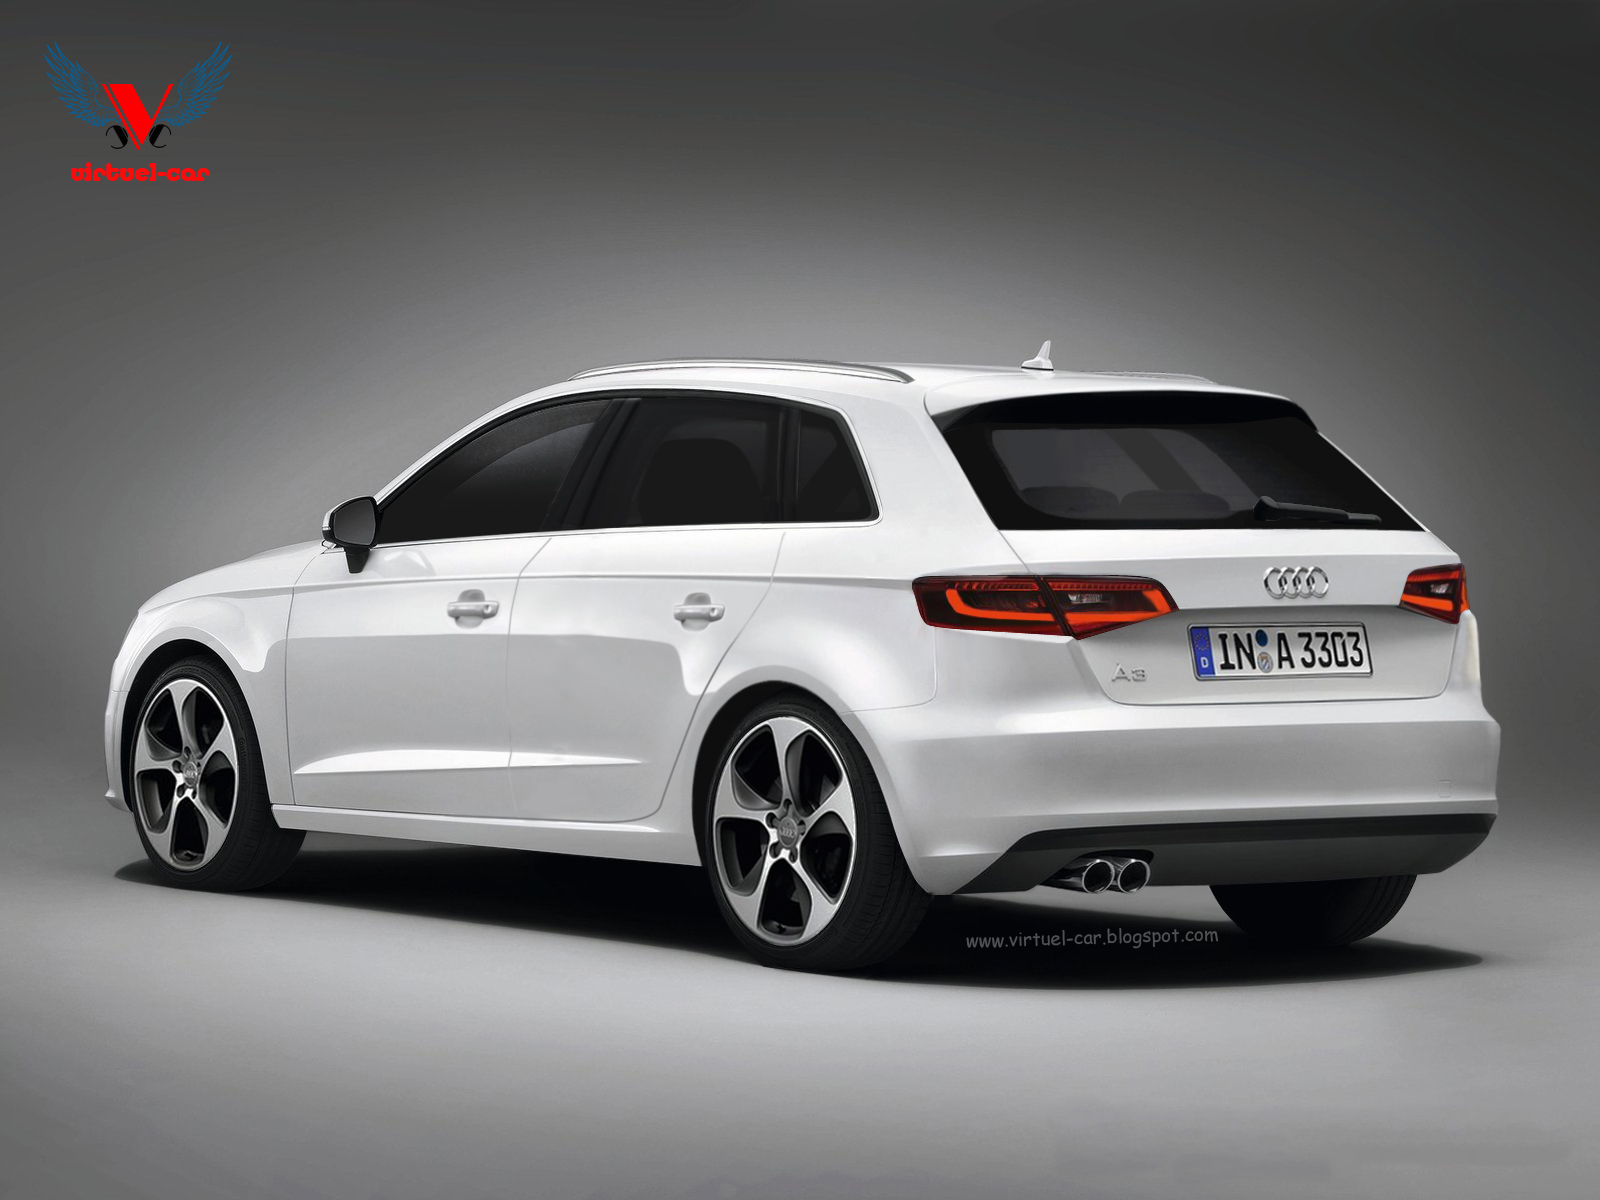 Upcoming 2013 Audi A3 Sportback Illustrated Ahead of its Paris Motor Show  Debut | Carscoops